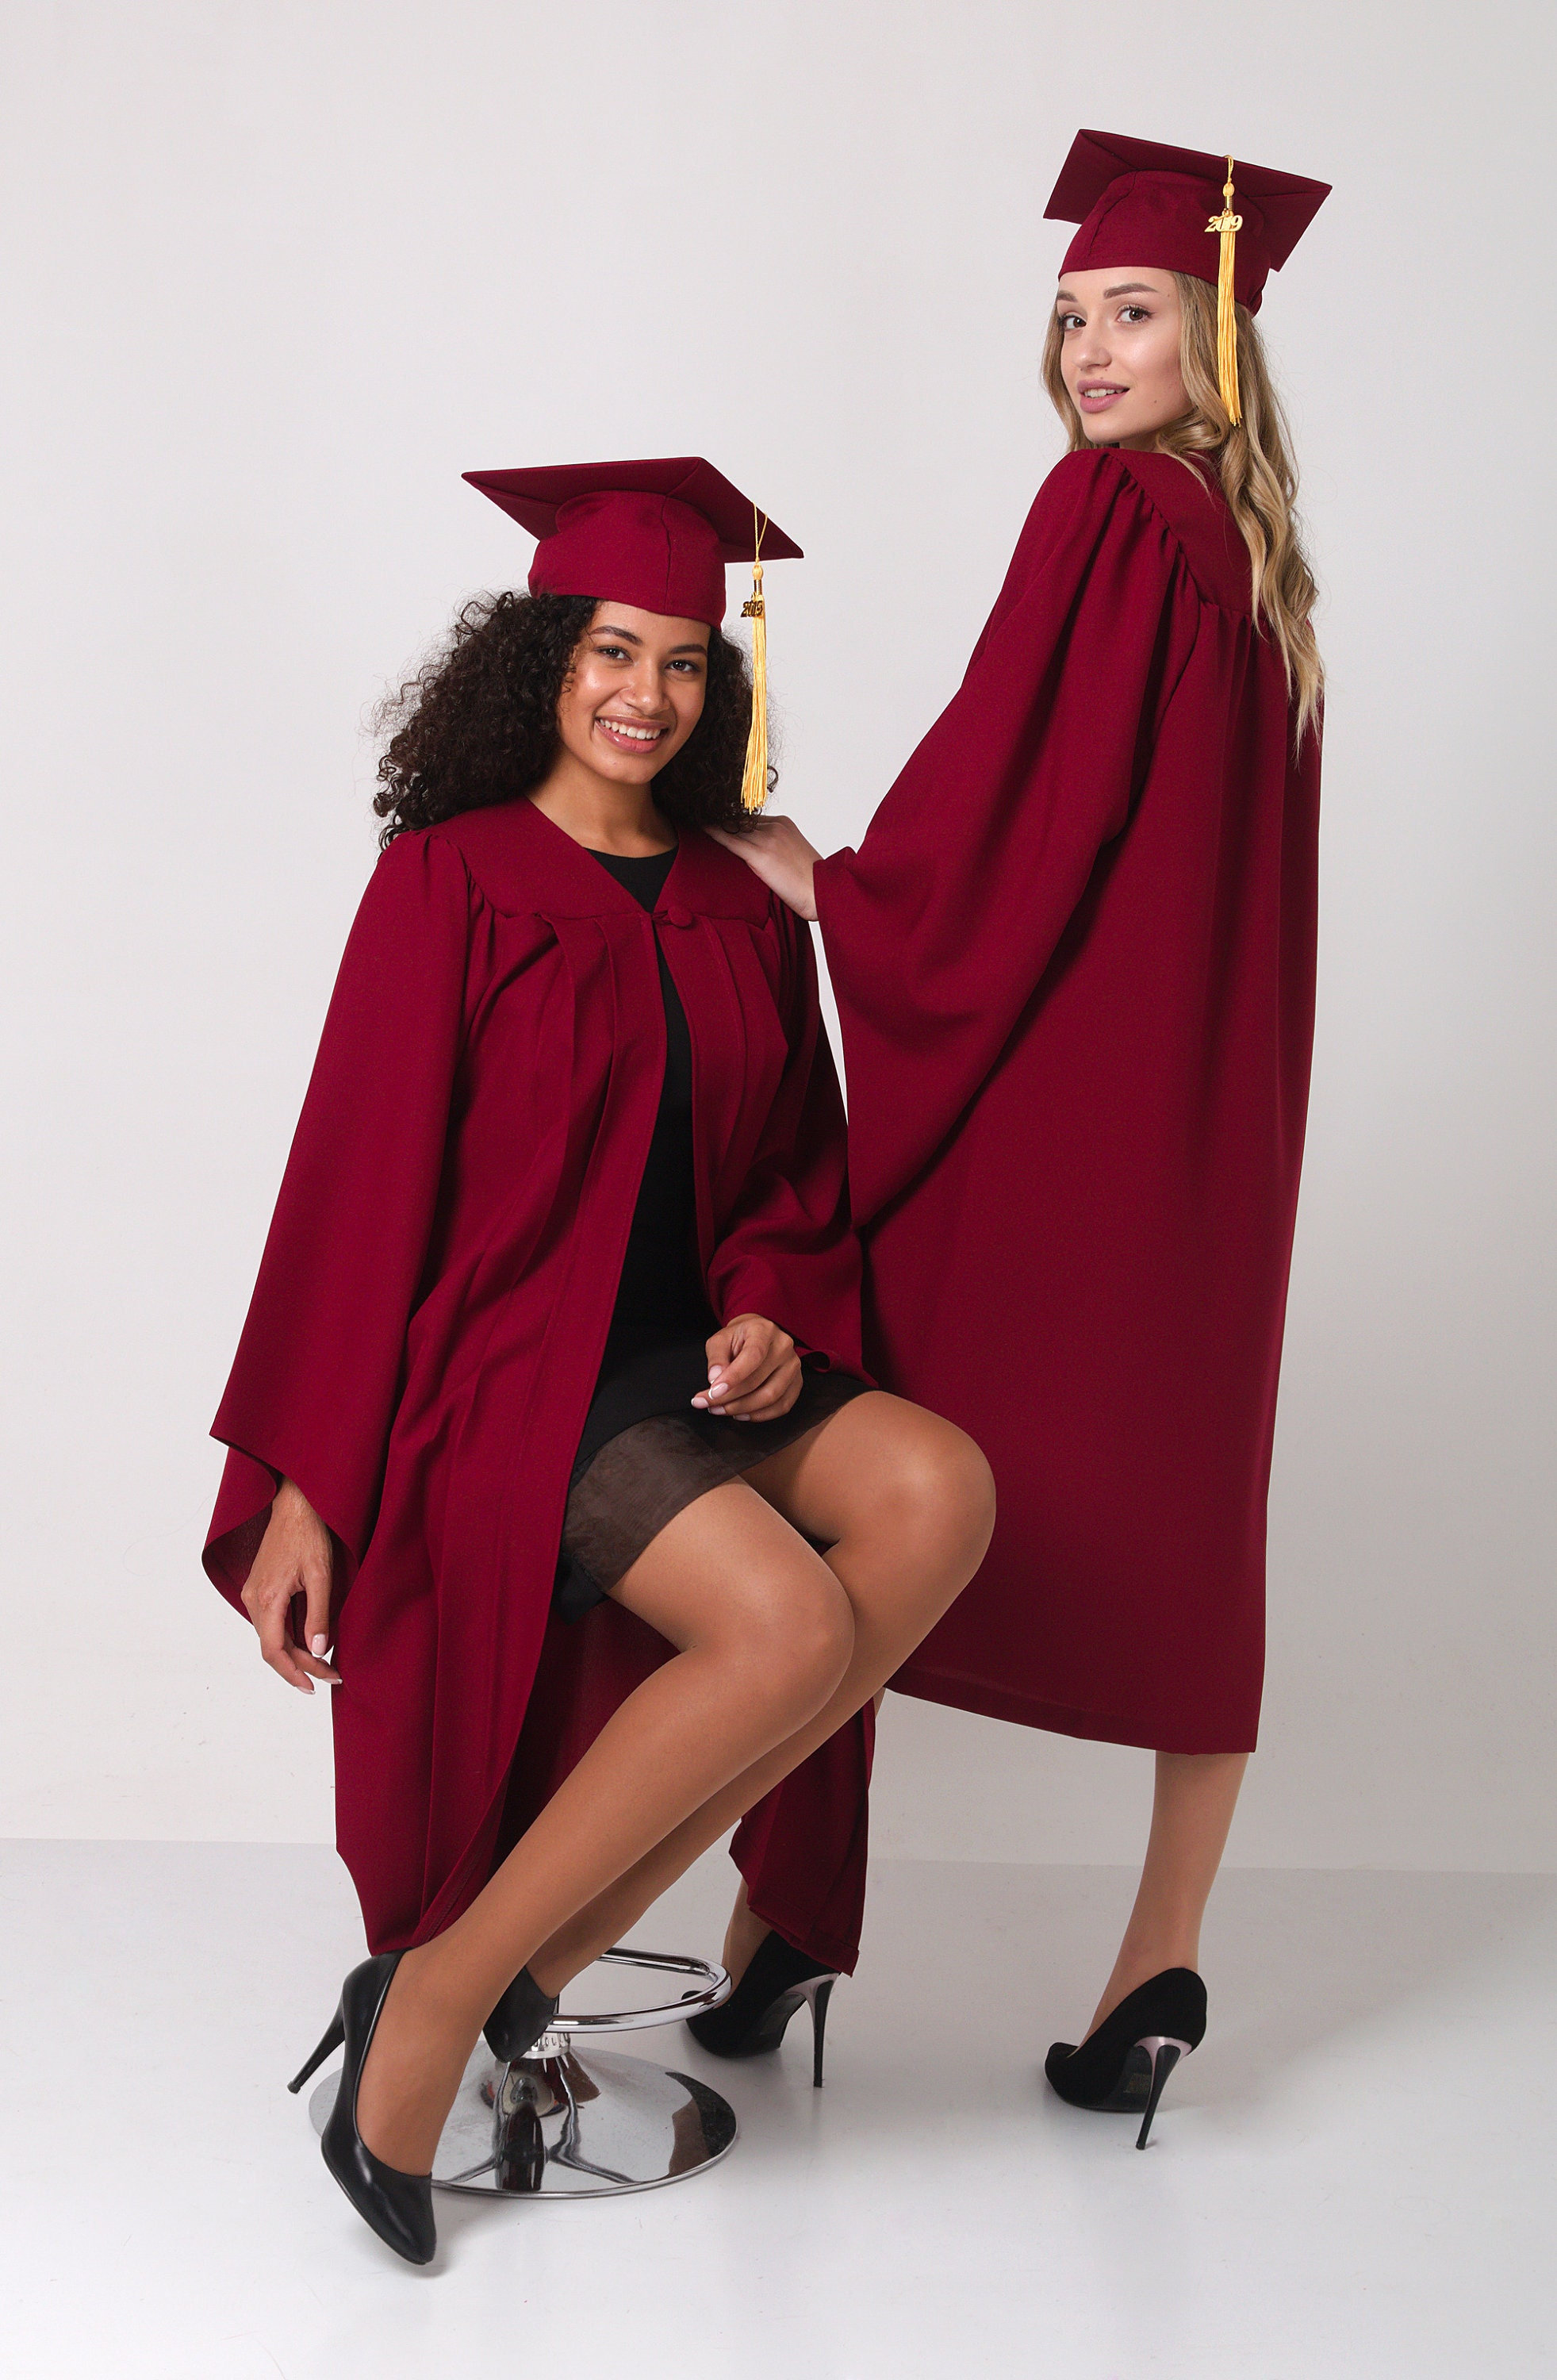 Cap And Gown png images | PNGWing